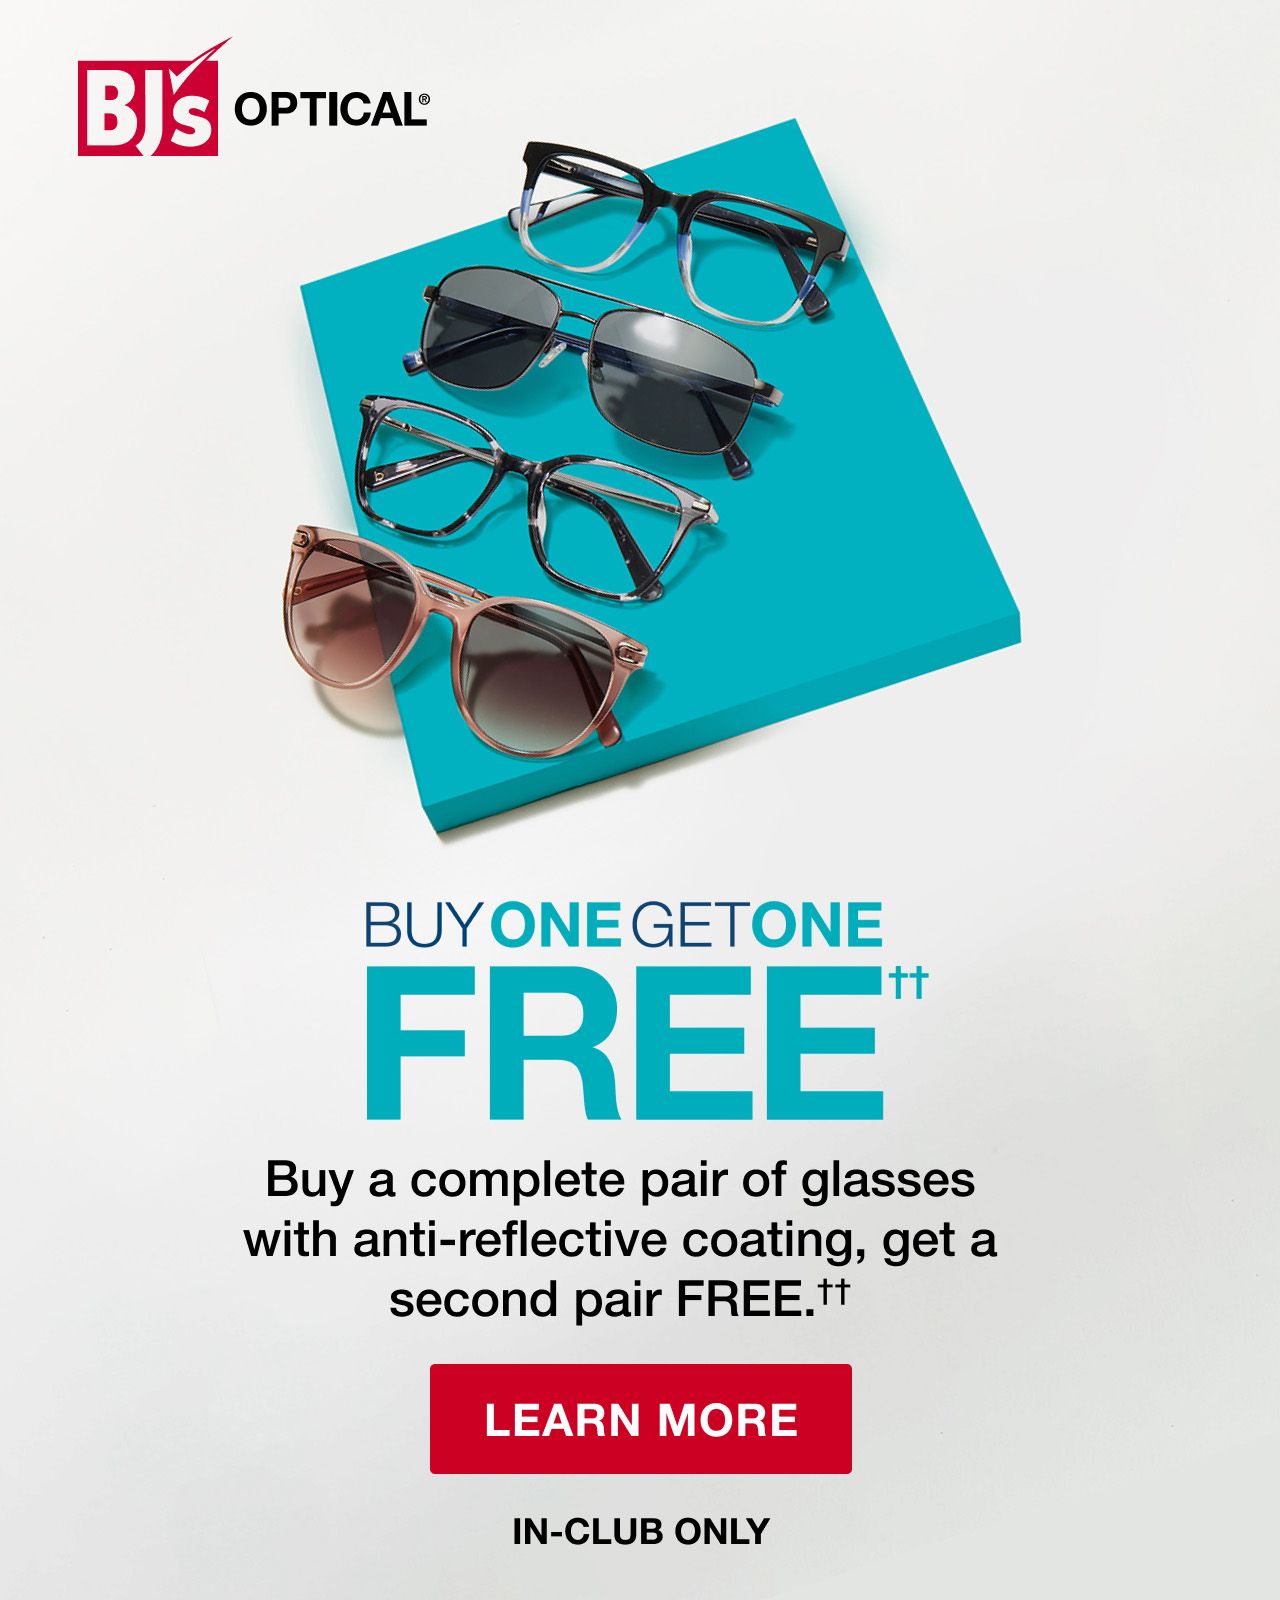 BJ's Optical®. Click here to learn more.